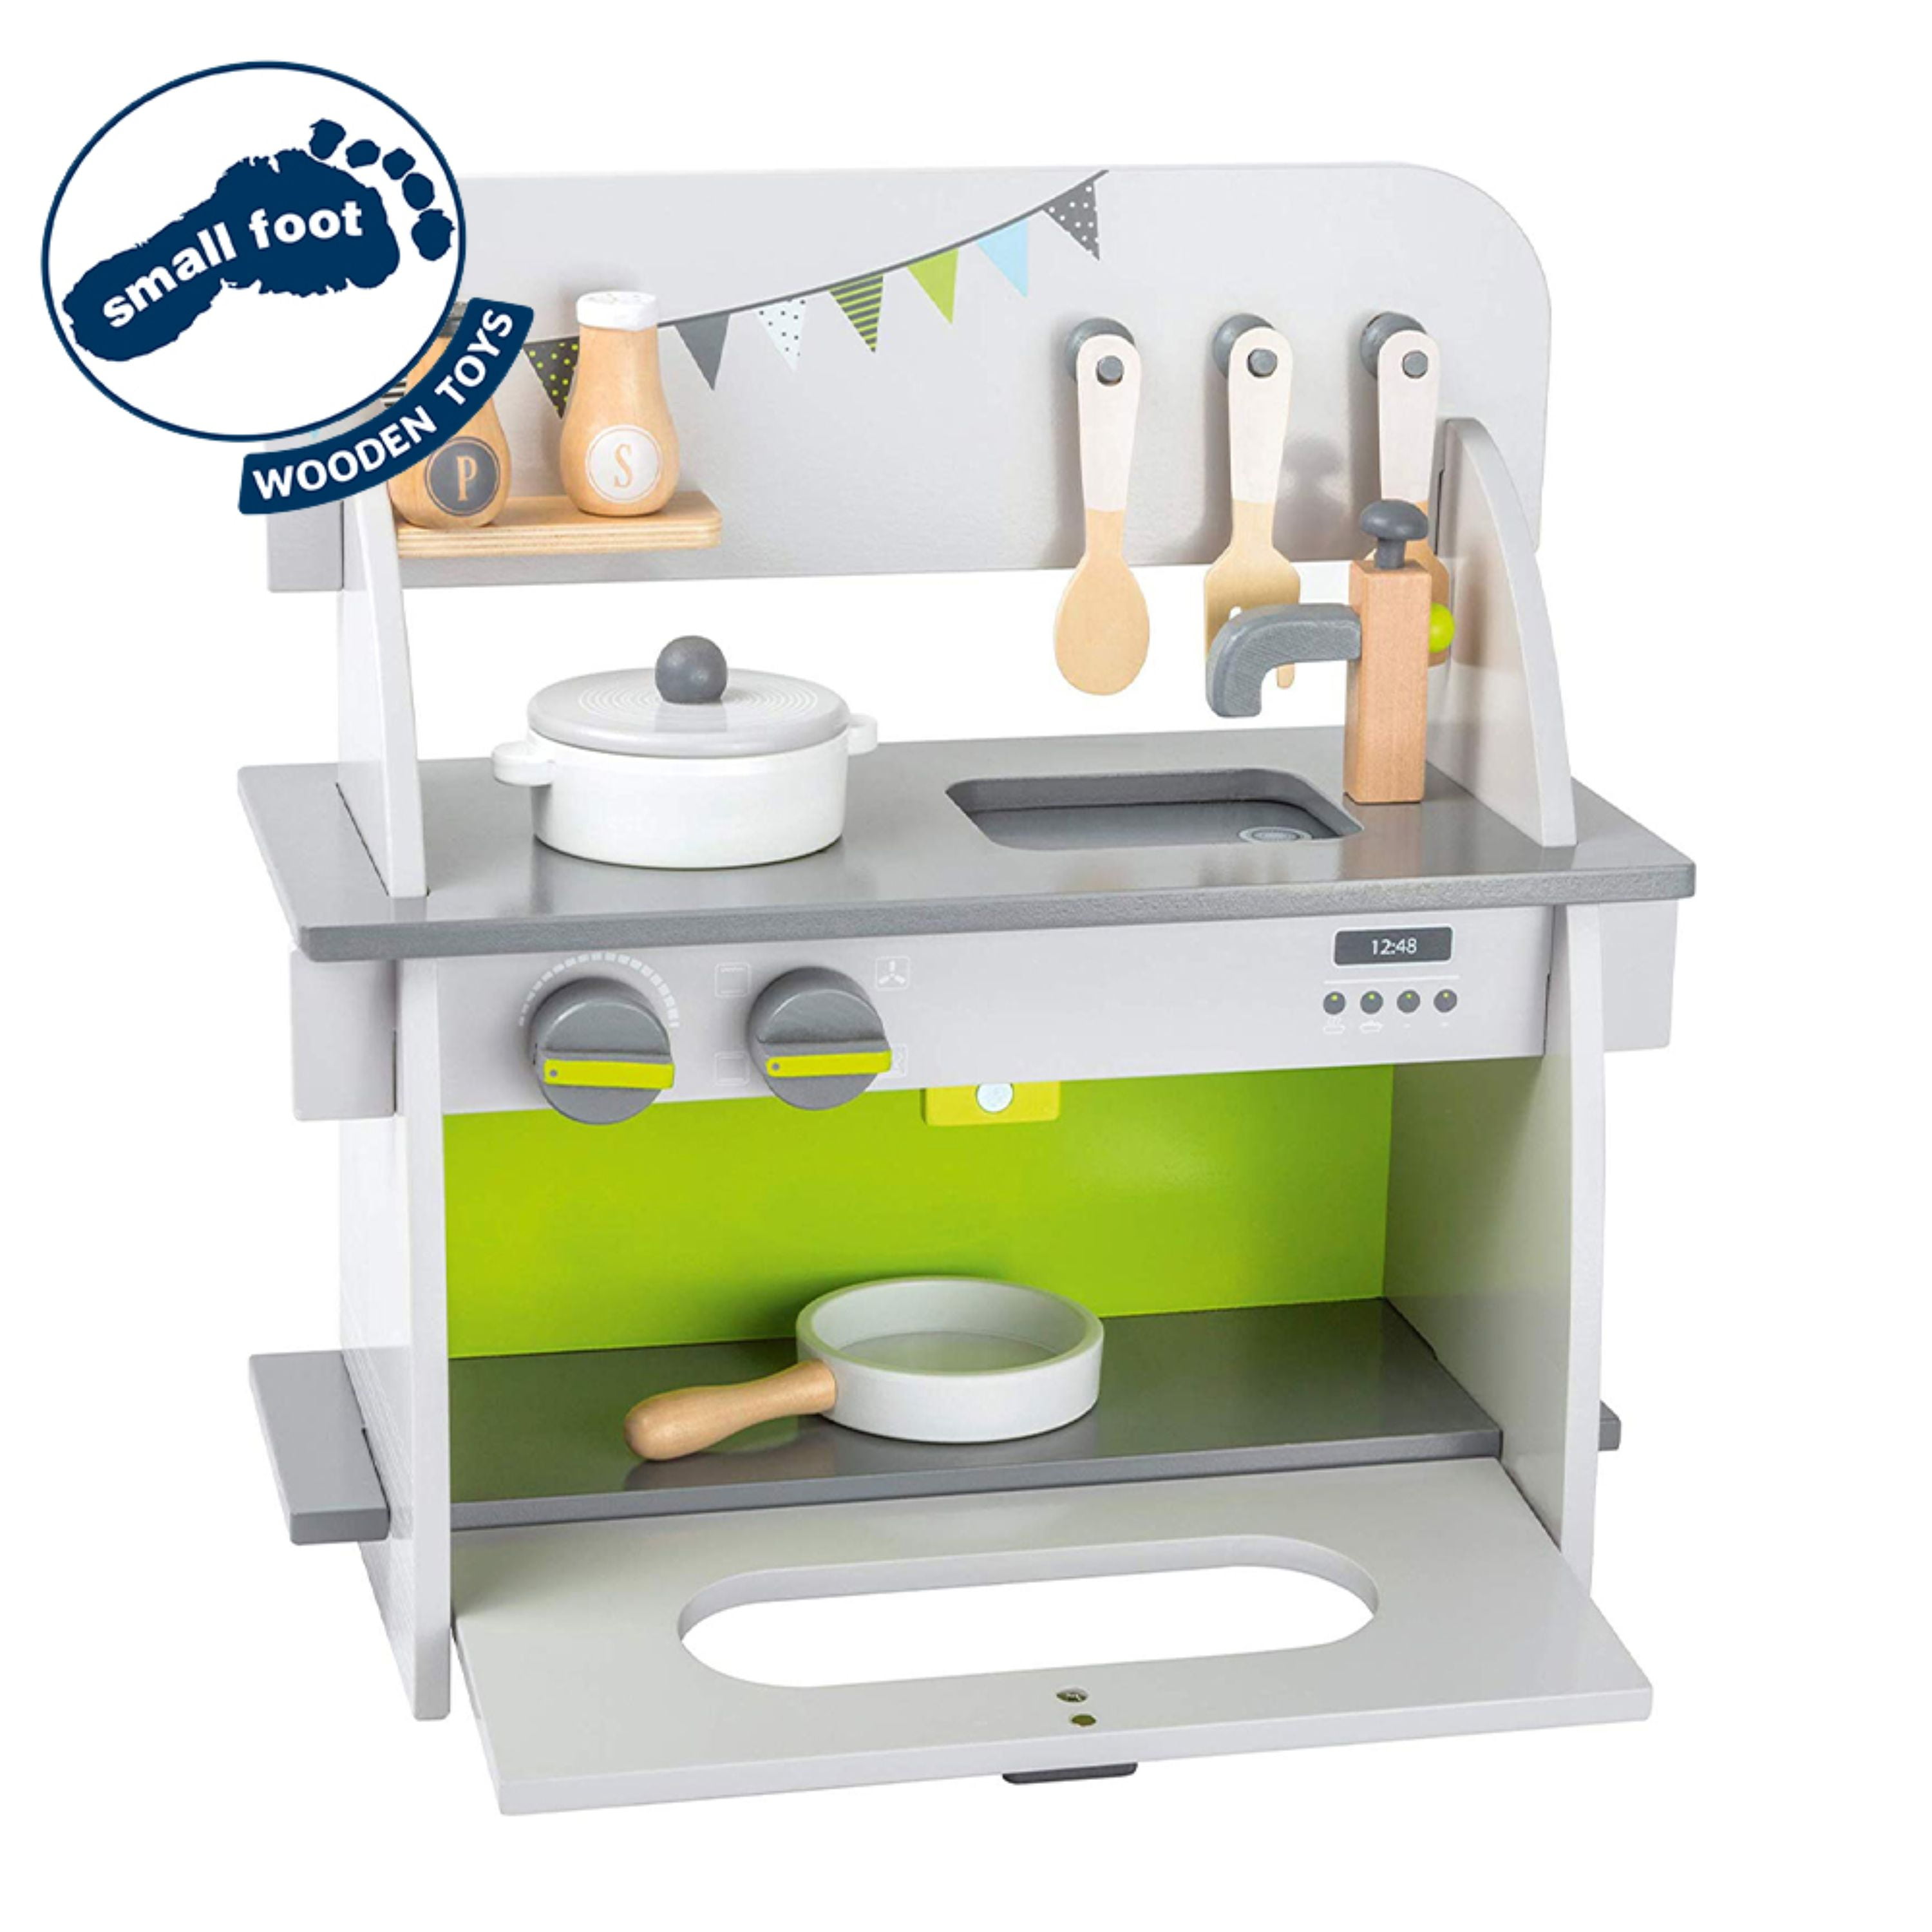 small foot Cookware Set for Play Kitchen - Play kitchen and food